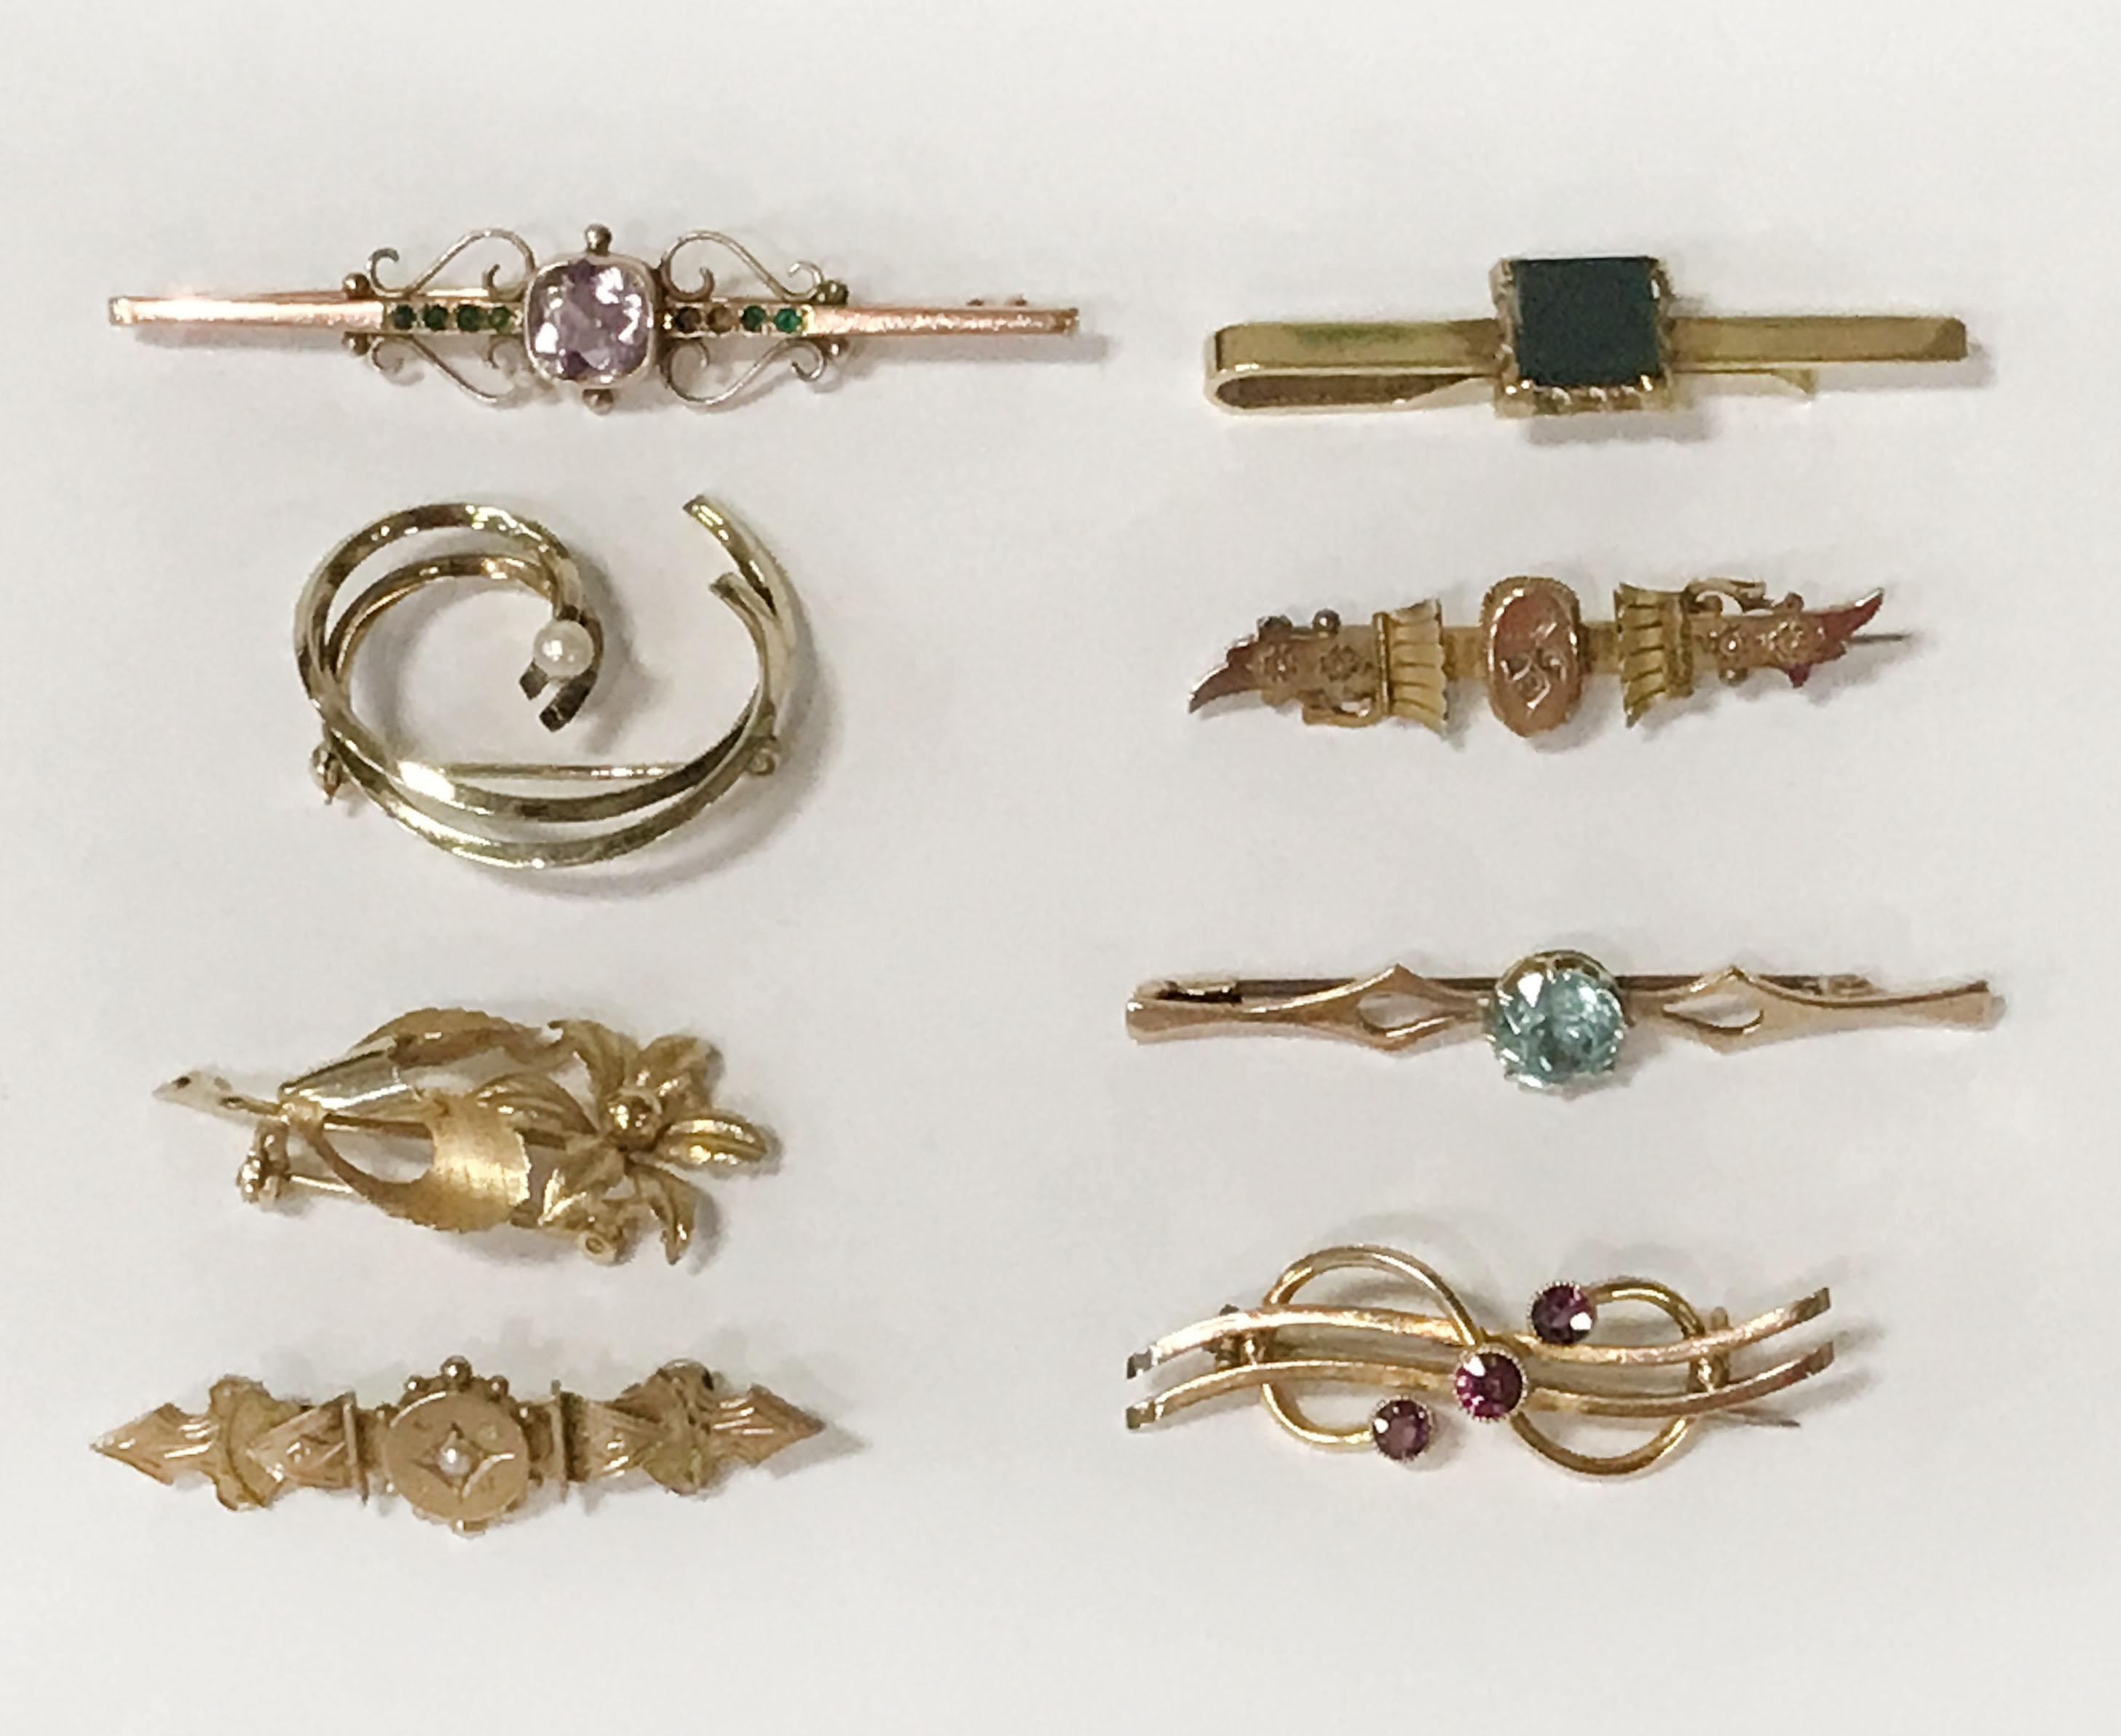 5 9CT GOLD TIE PINS WITH GEMSTONES & 2 9CT GOLD BROOCHES